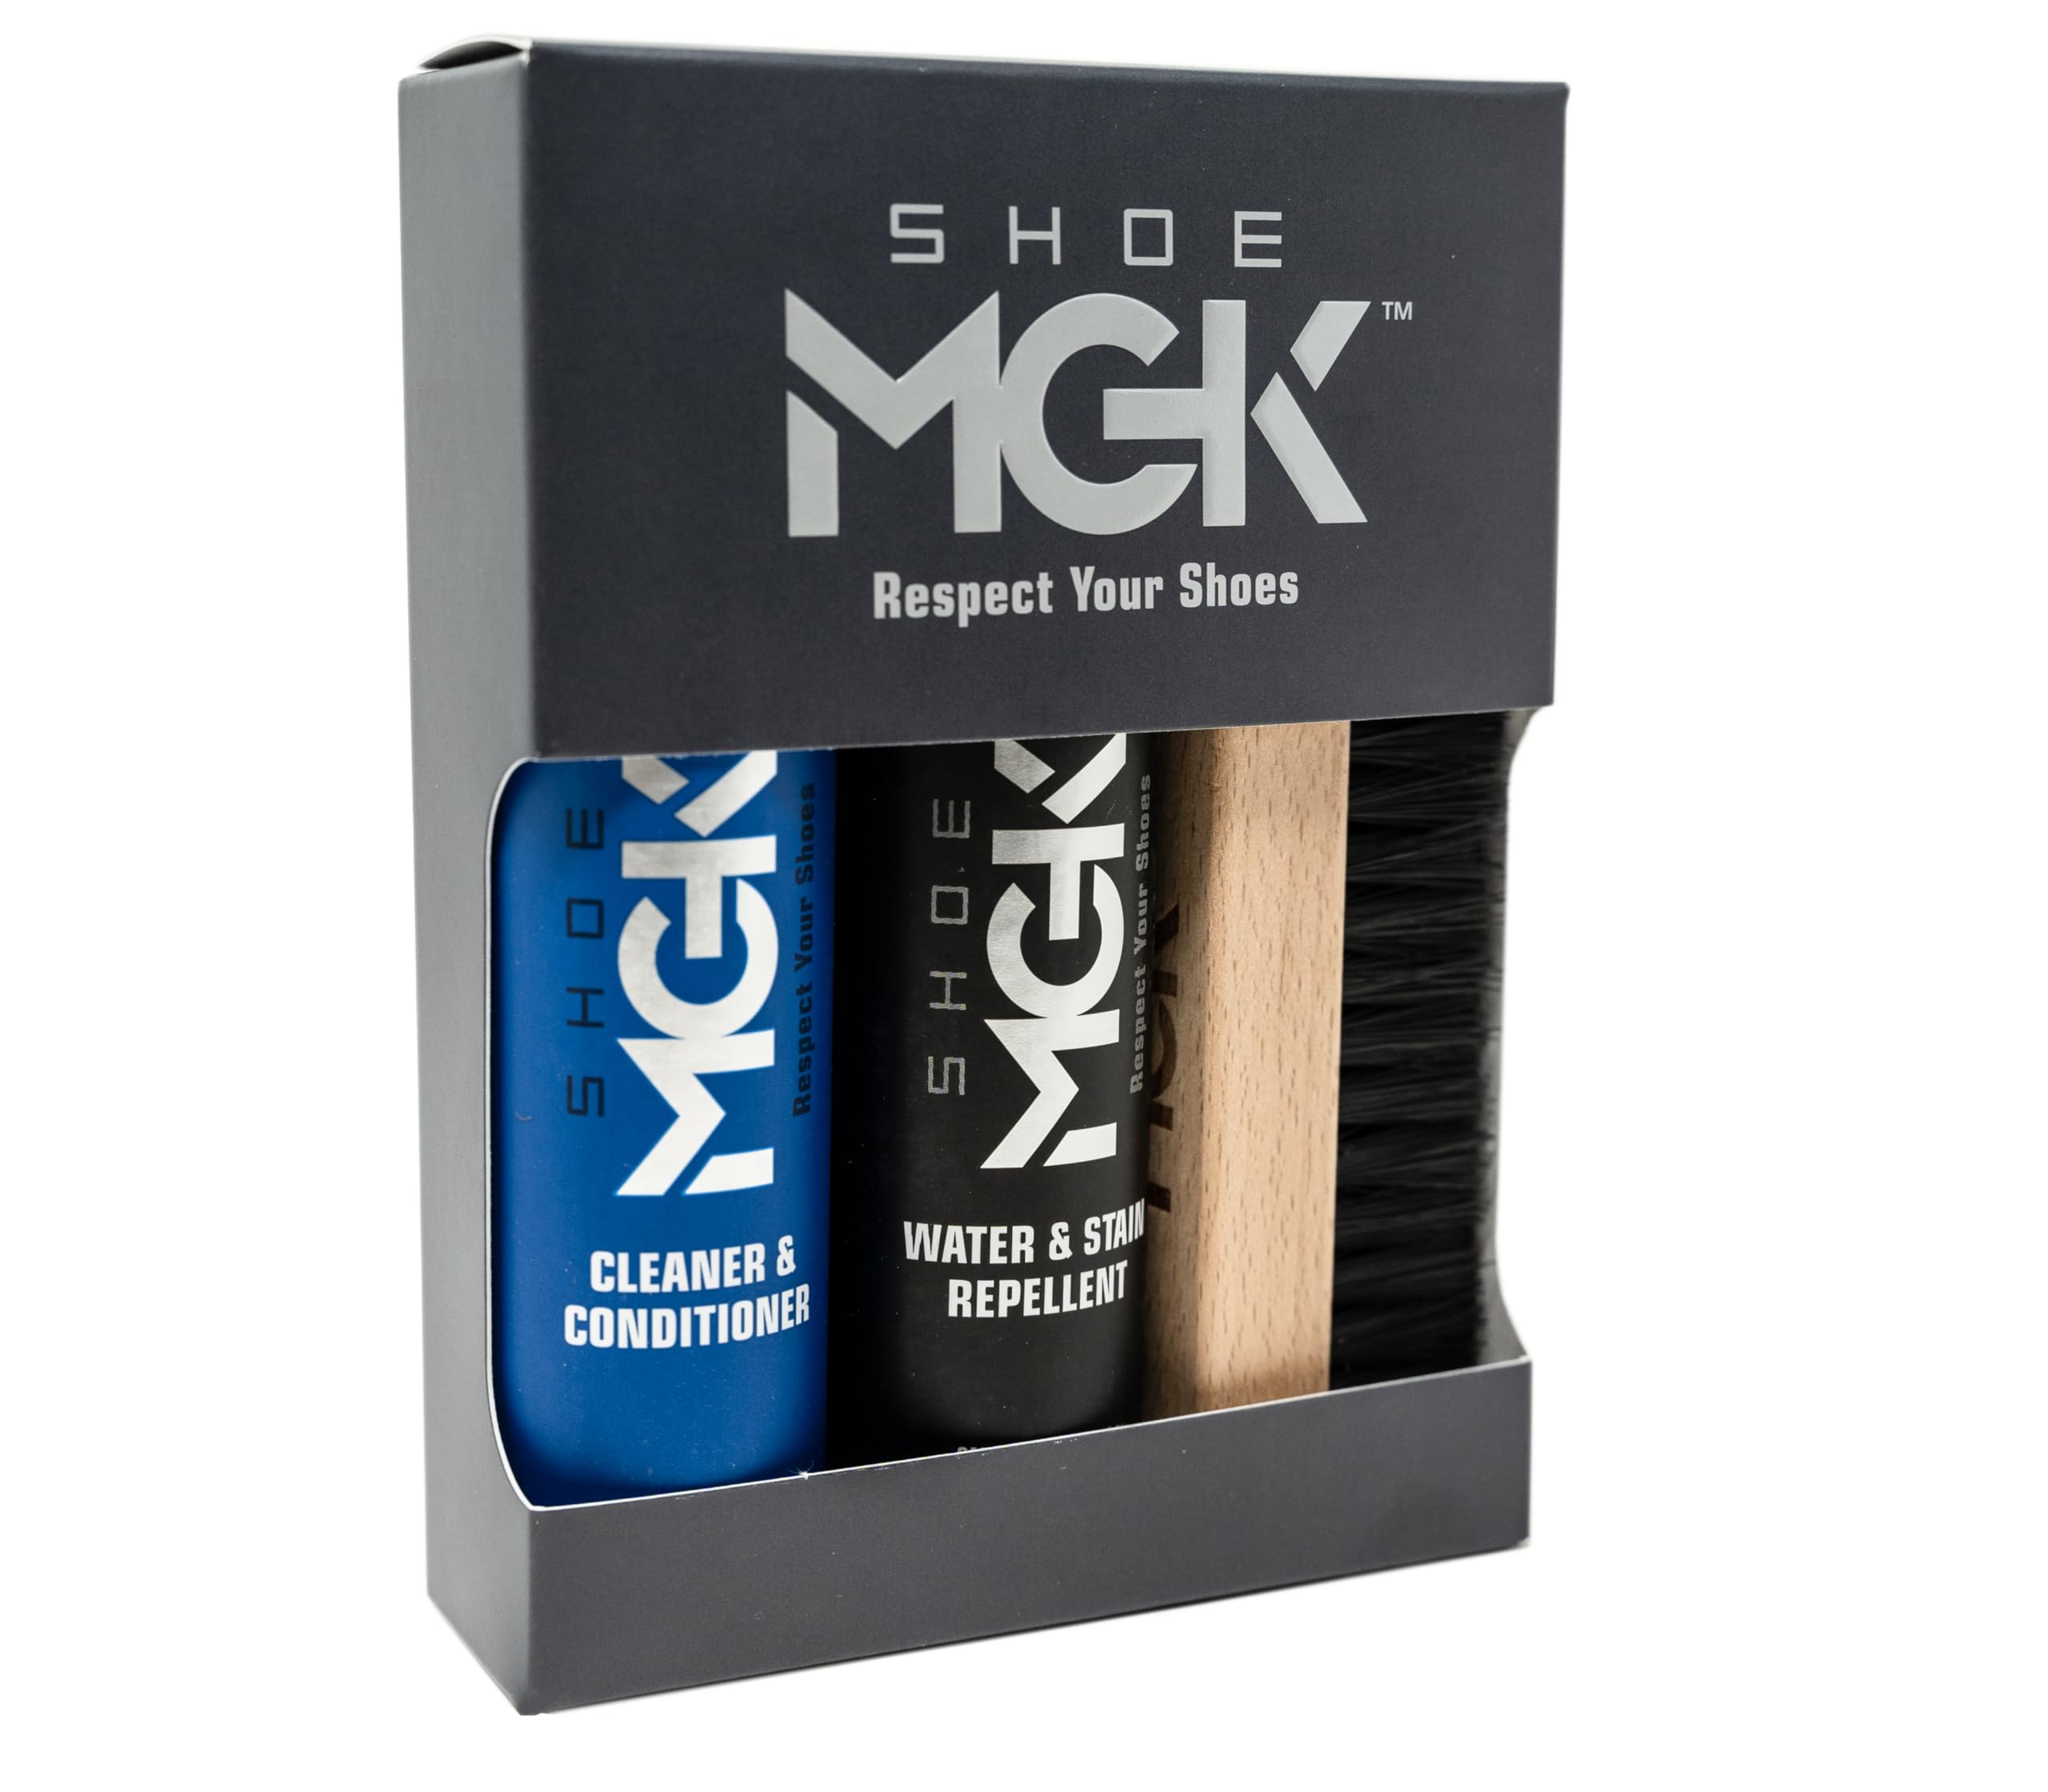 Shoe MGK Clean & Protect Kit - Shoe Protection featuring Water and Stain Repellent with Cleaner and Conditioner - Caps Fitted